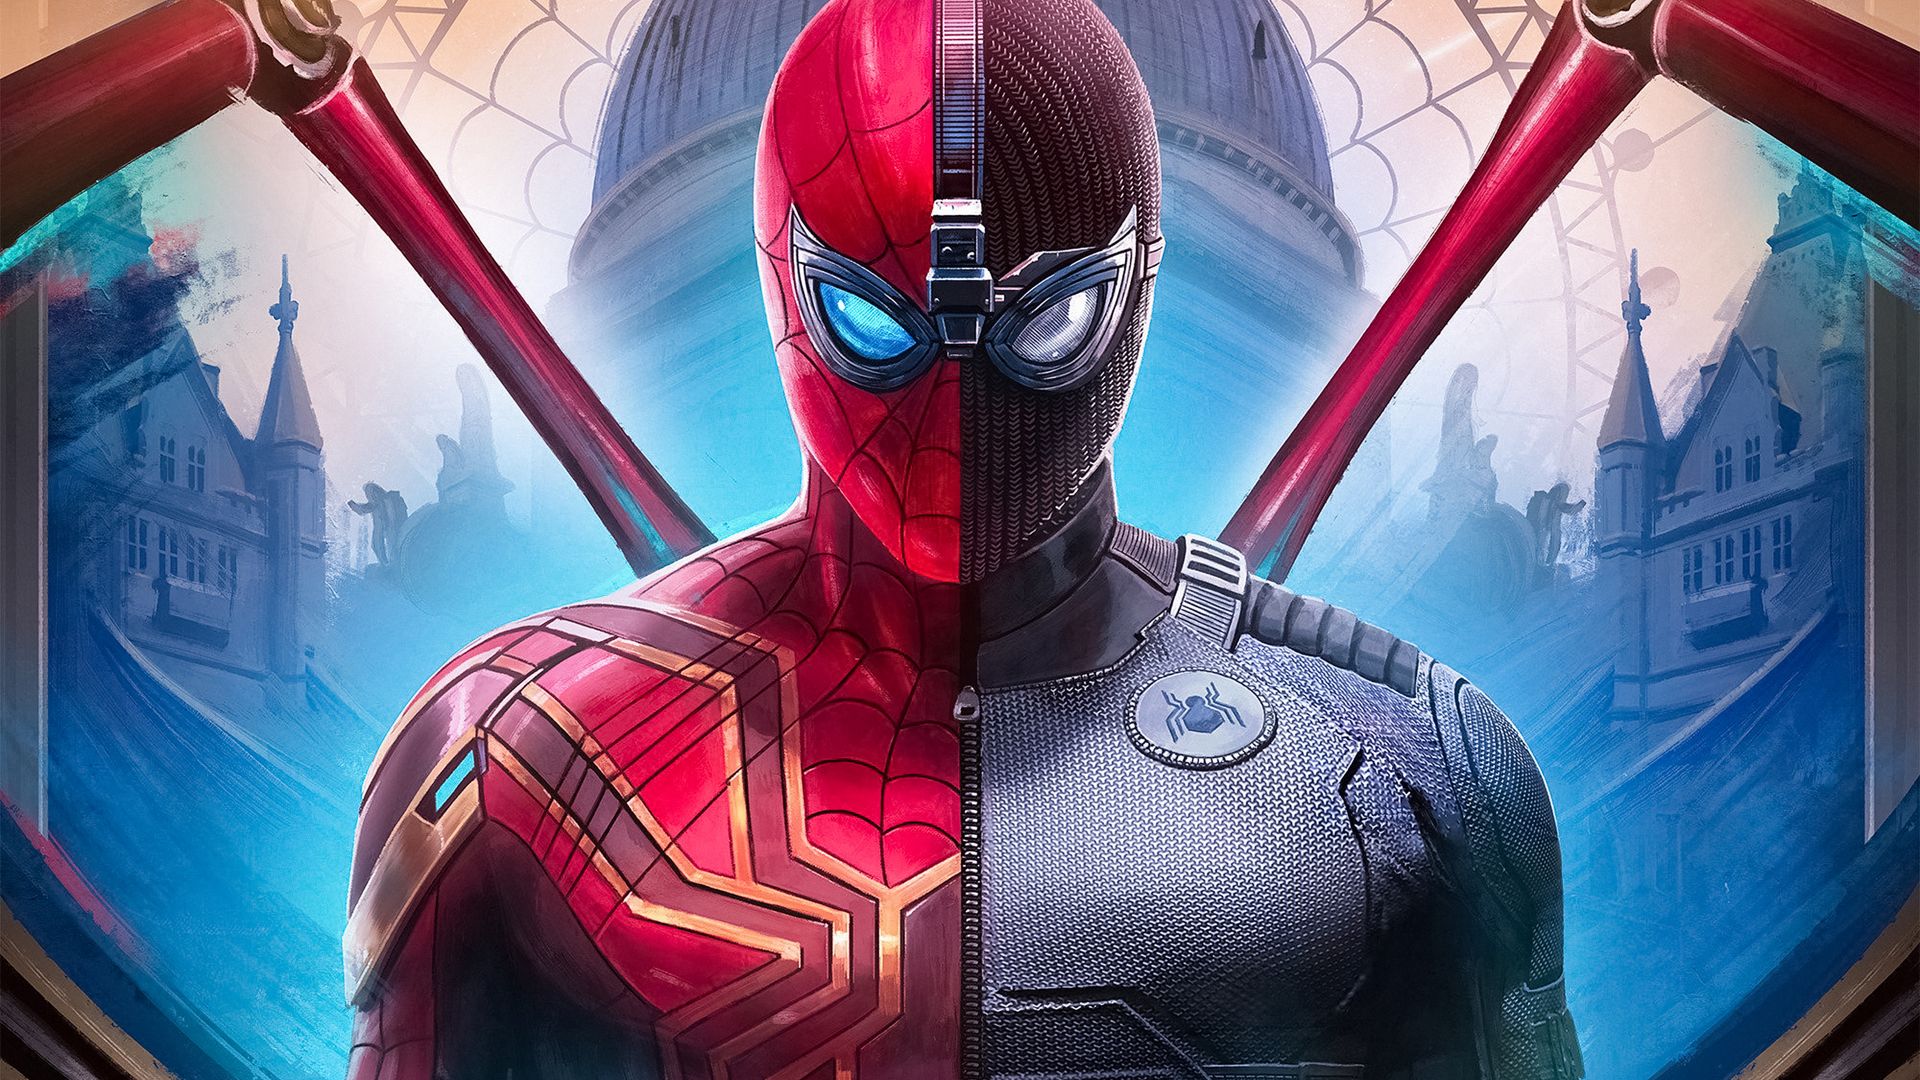 Desktop Wallpaper 2019 Movie, Spider Man: Far From Home, Iron Spider, Stealth Suit, Face Off, HD Image, Picture, Background, 137050